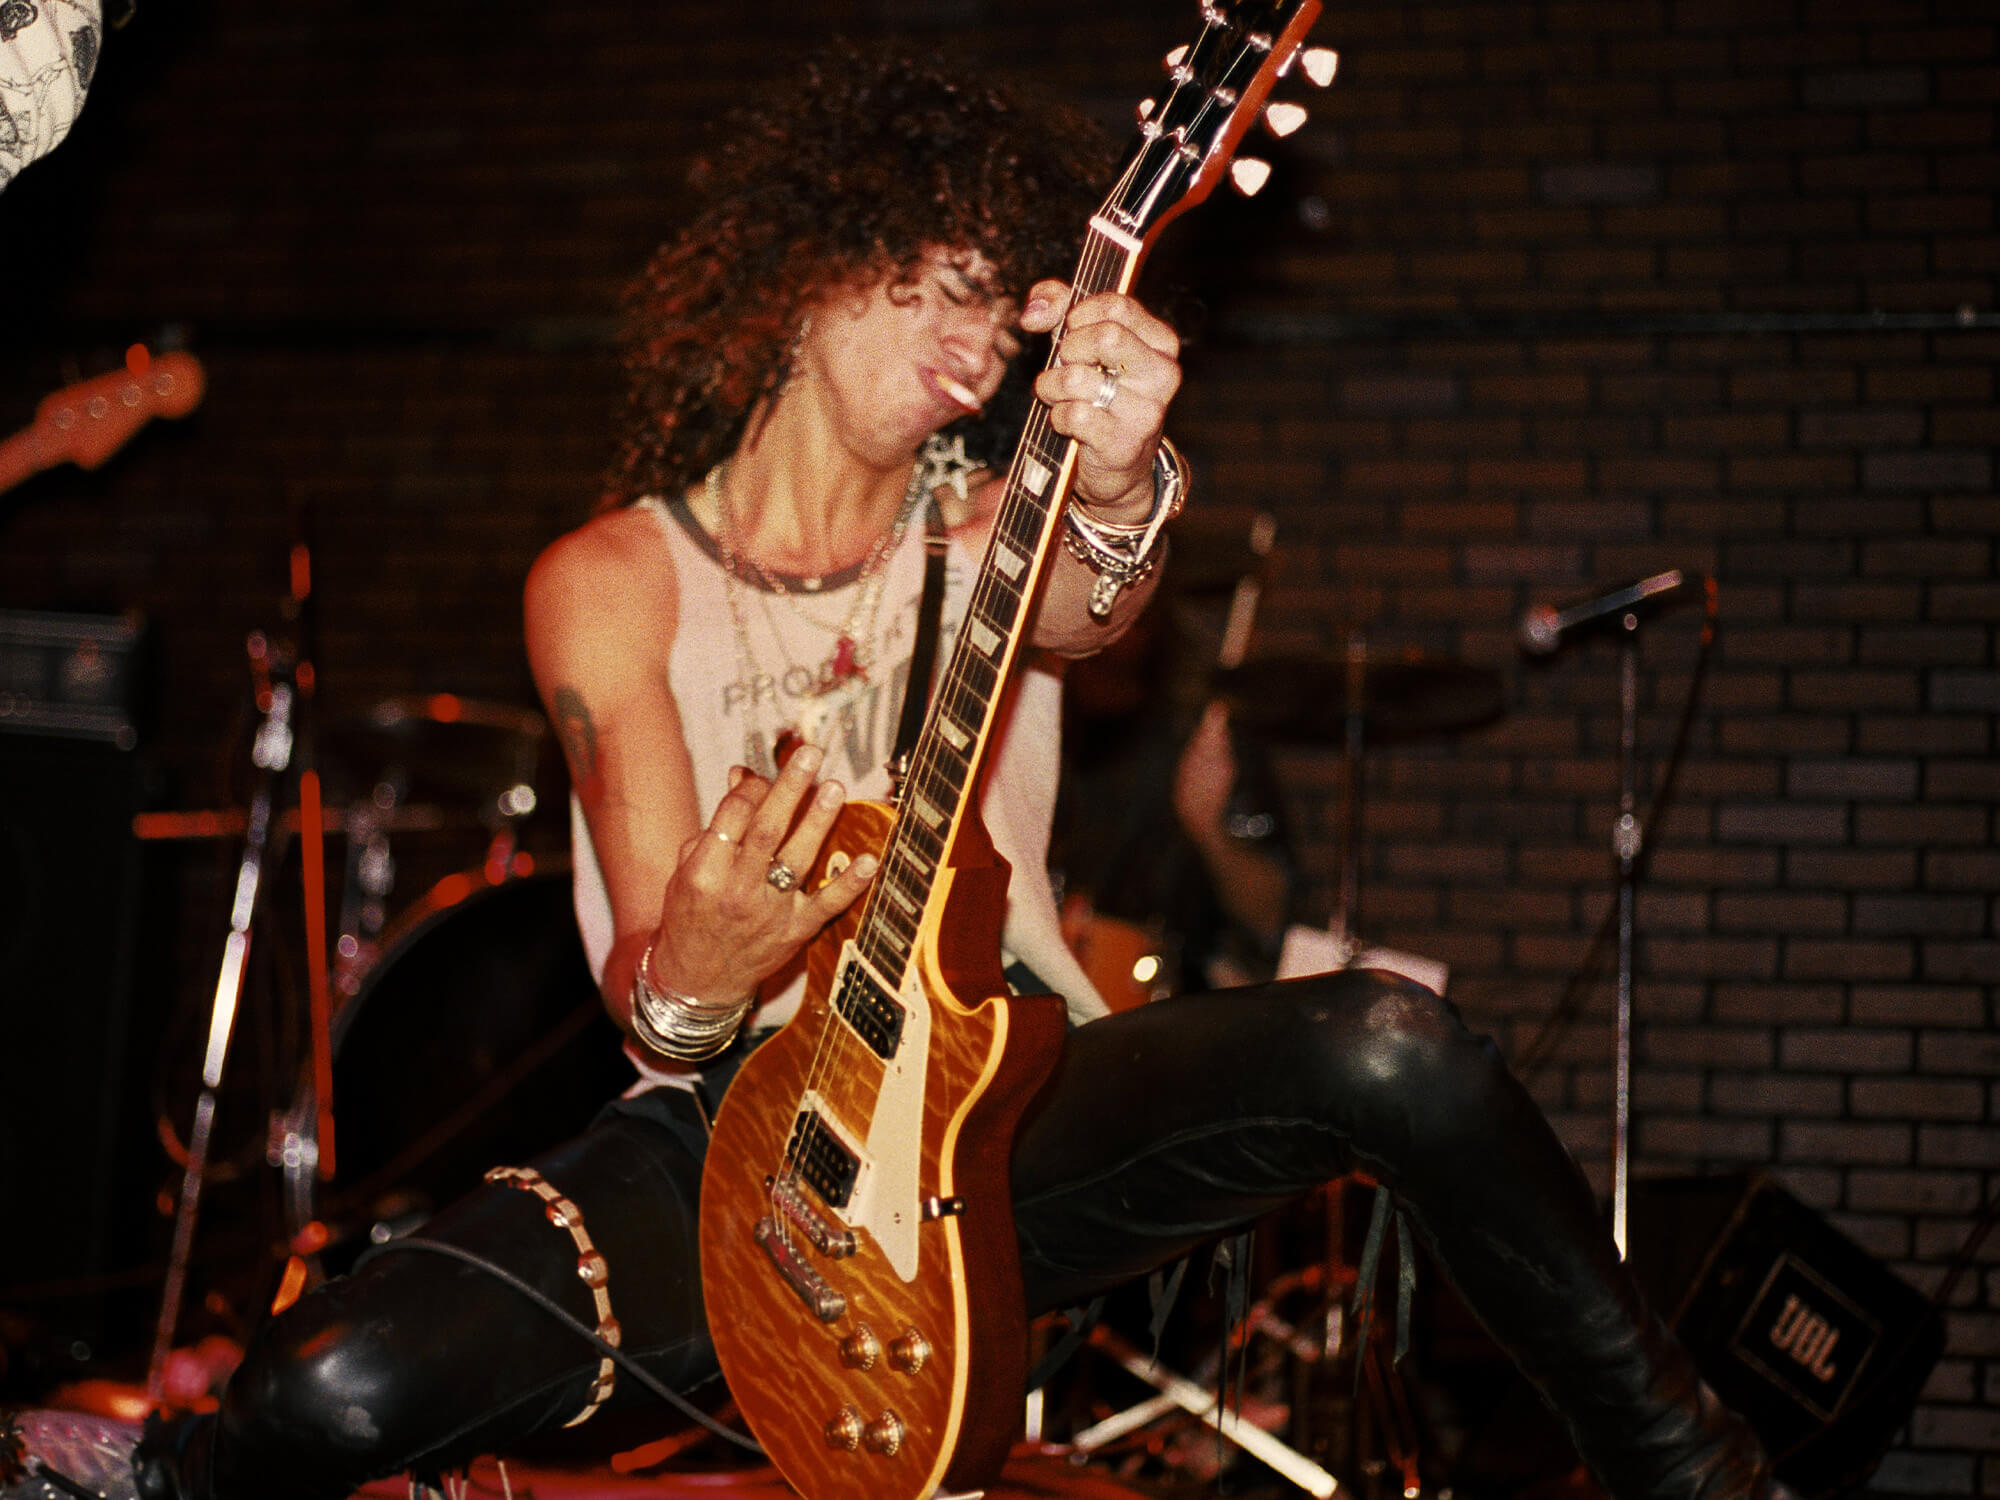 Slash in 1985, he has a cigarette in his mouth and is playing guitar